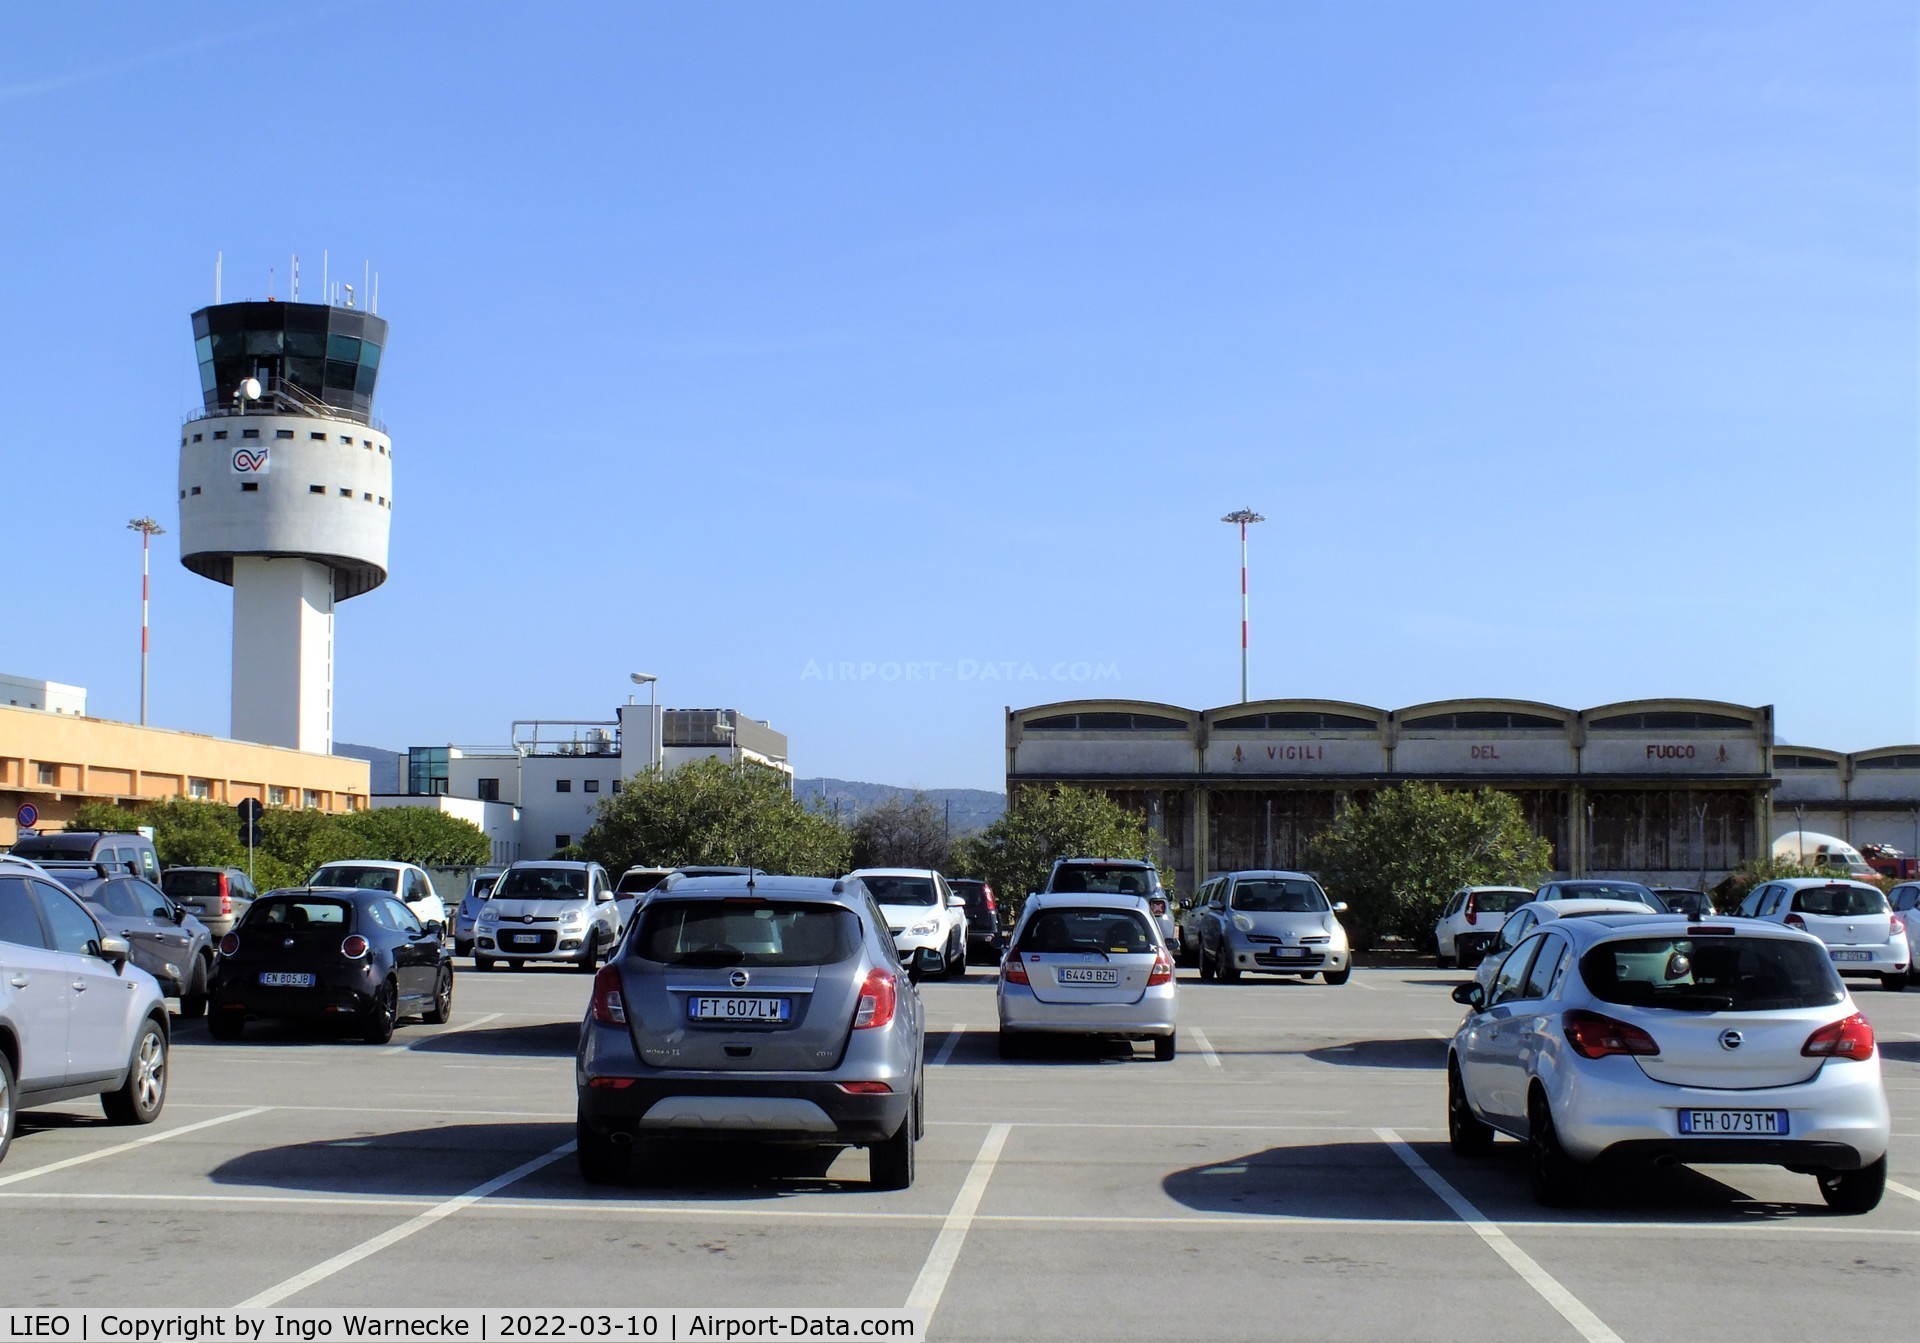 Olbia Airport, Costa Smeralda Airport Italy (LIEO) - tower and airport firebrigade building of Olbia/Costa Smeralda airport